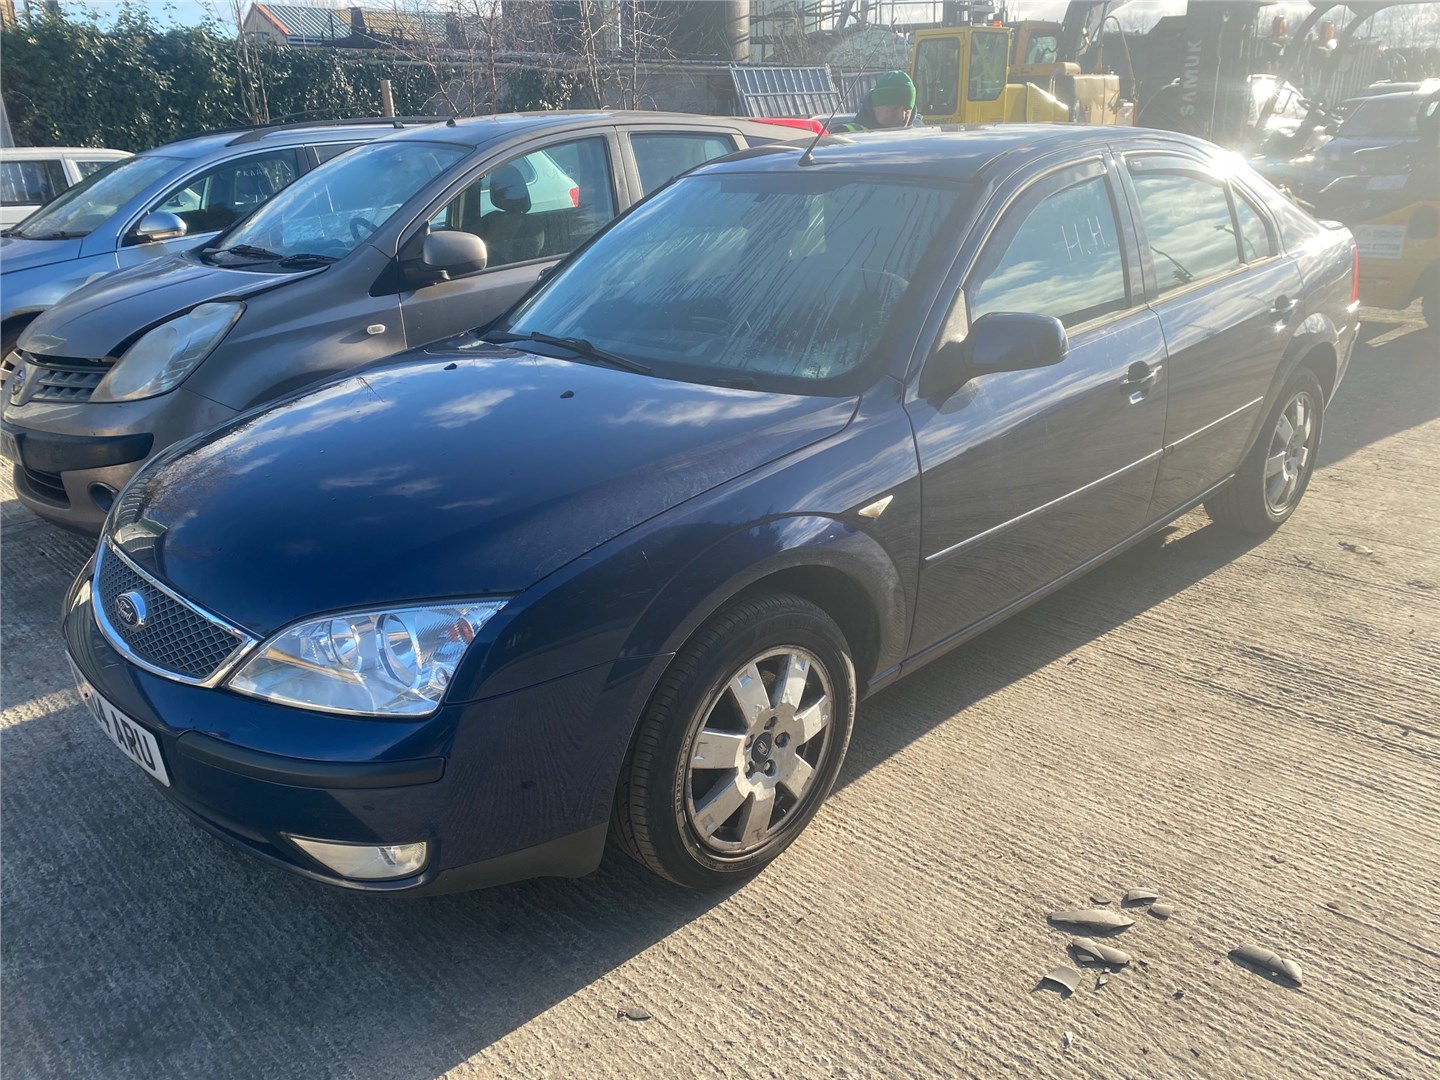 1352104 Ручка двери салона Ford Mondeo 3 2000-2007 2004